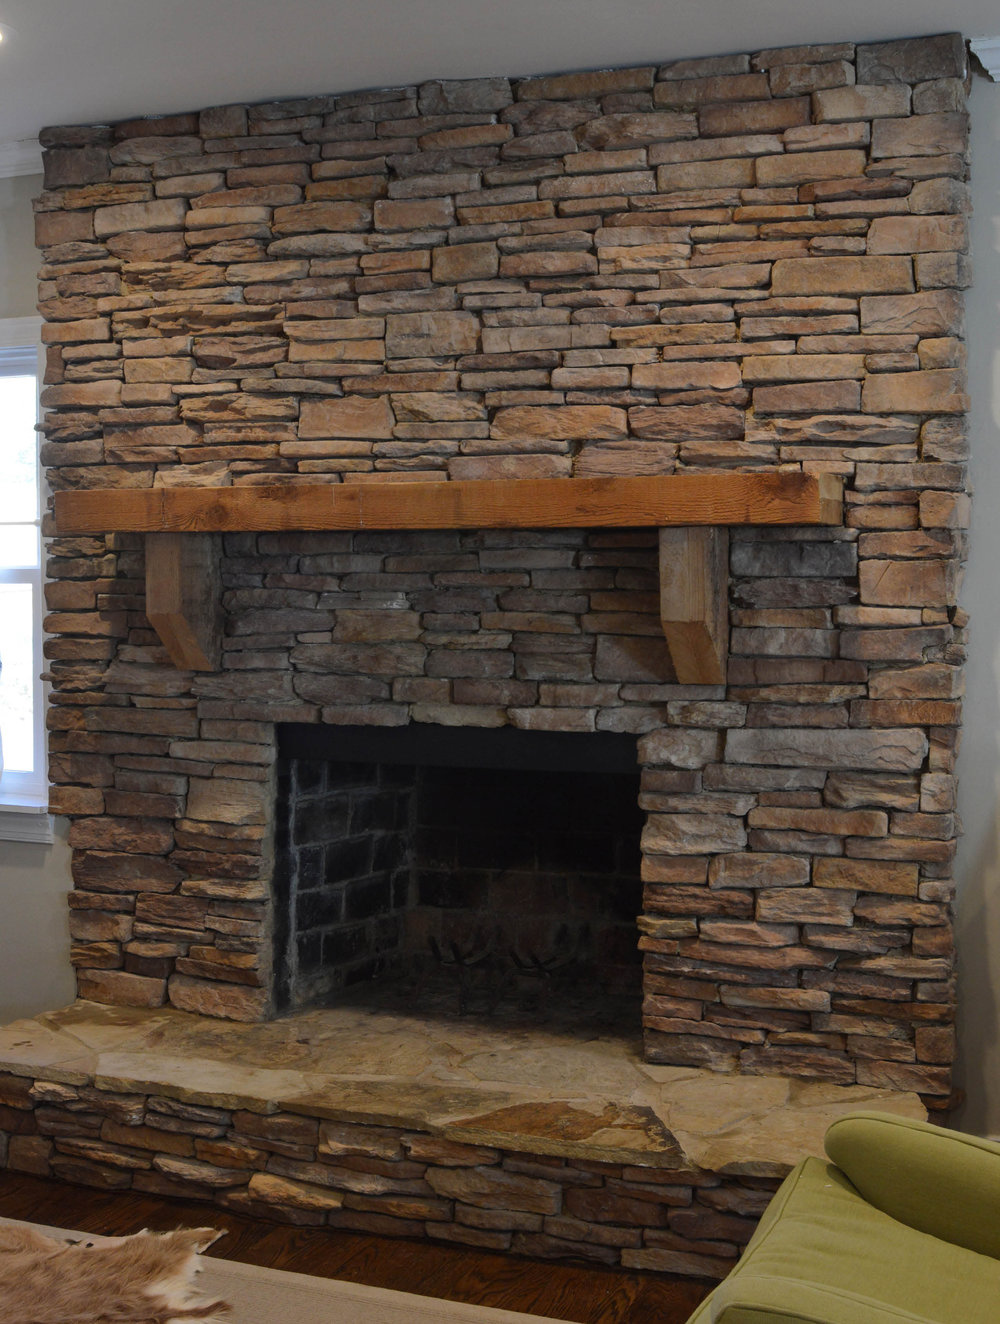 Sandstone Fireplace Hearths Fresh before & after Our Fireplace Makeover — Hearth and Home